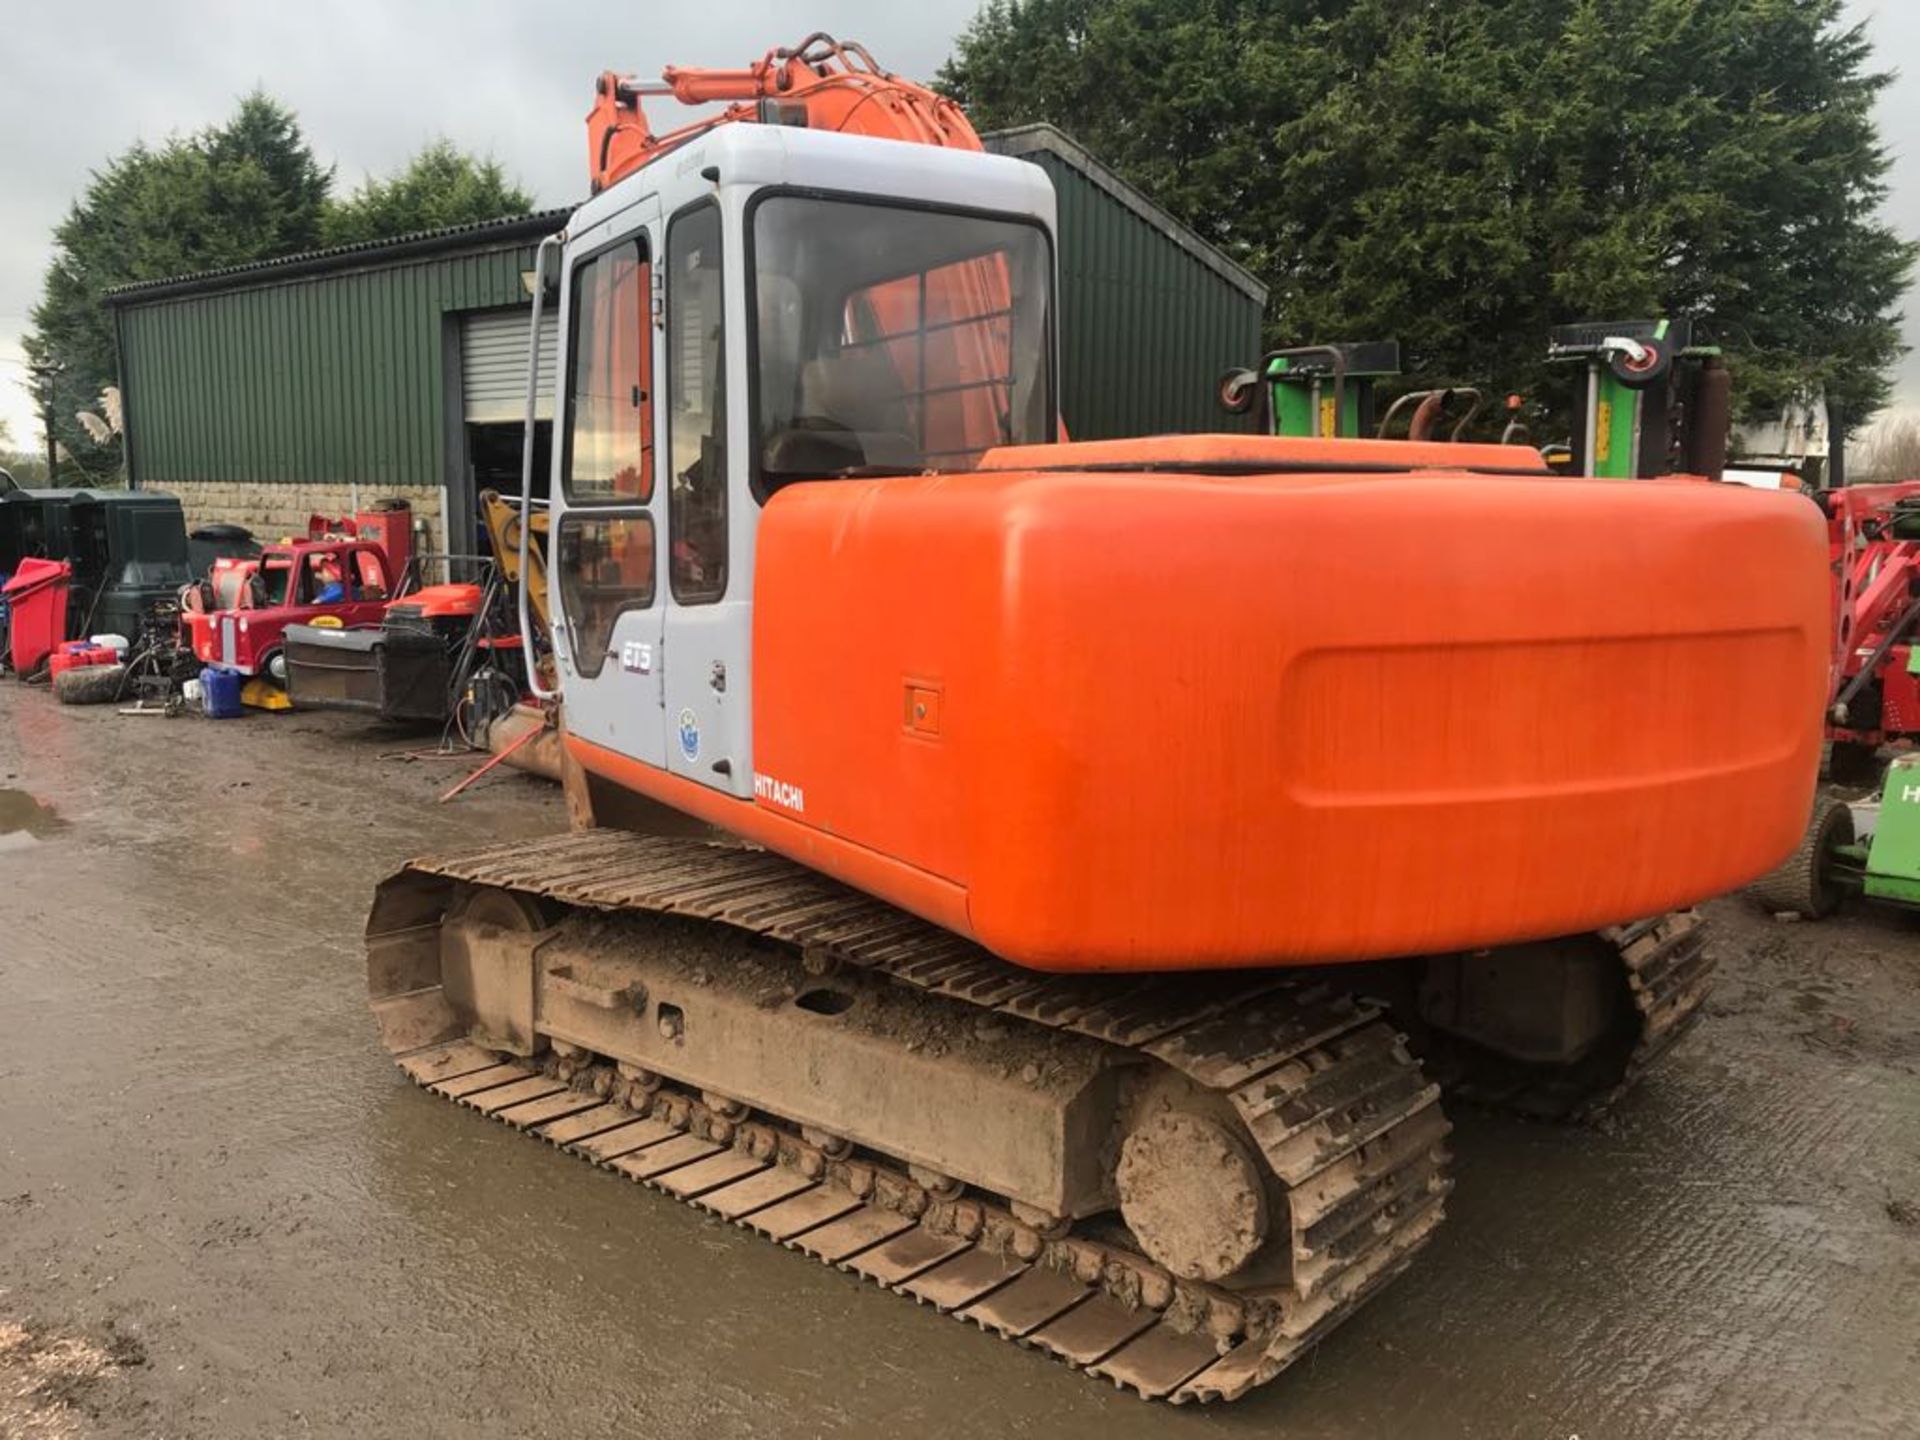 10 TONNE HITACHI DIGGER / EXCAVATOR, ALL GOOD AND WORKING, CLEAN & TIDY, SHOWING 6,021 HOURS - Bild 3 aus 11